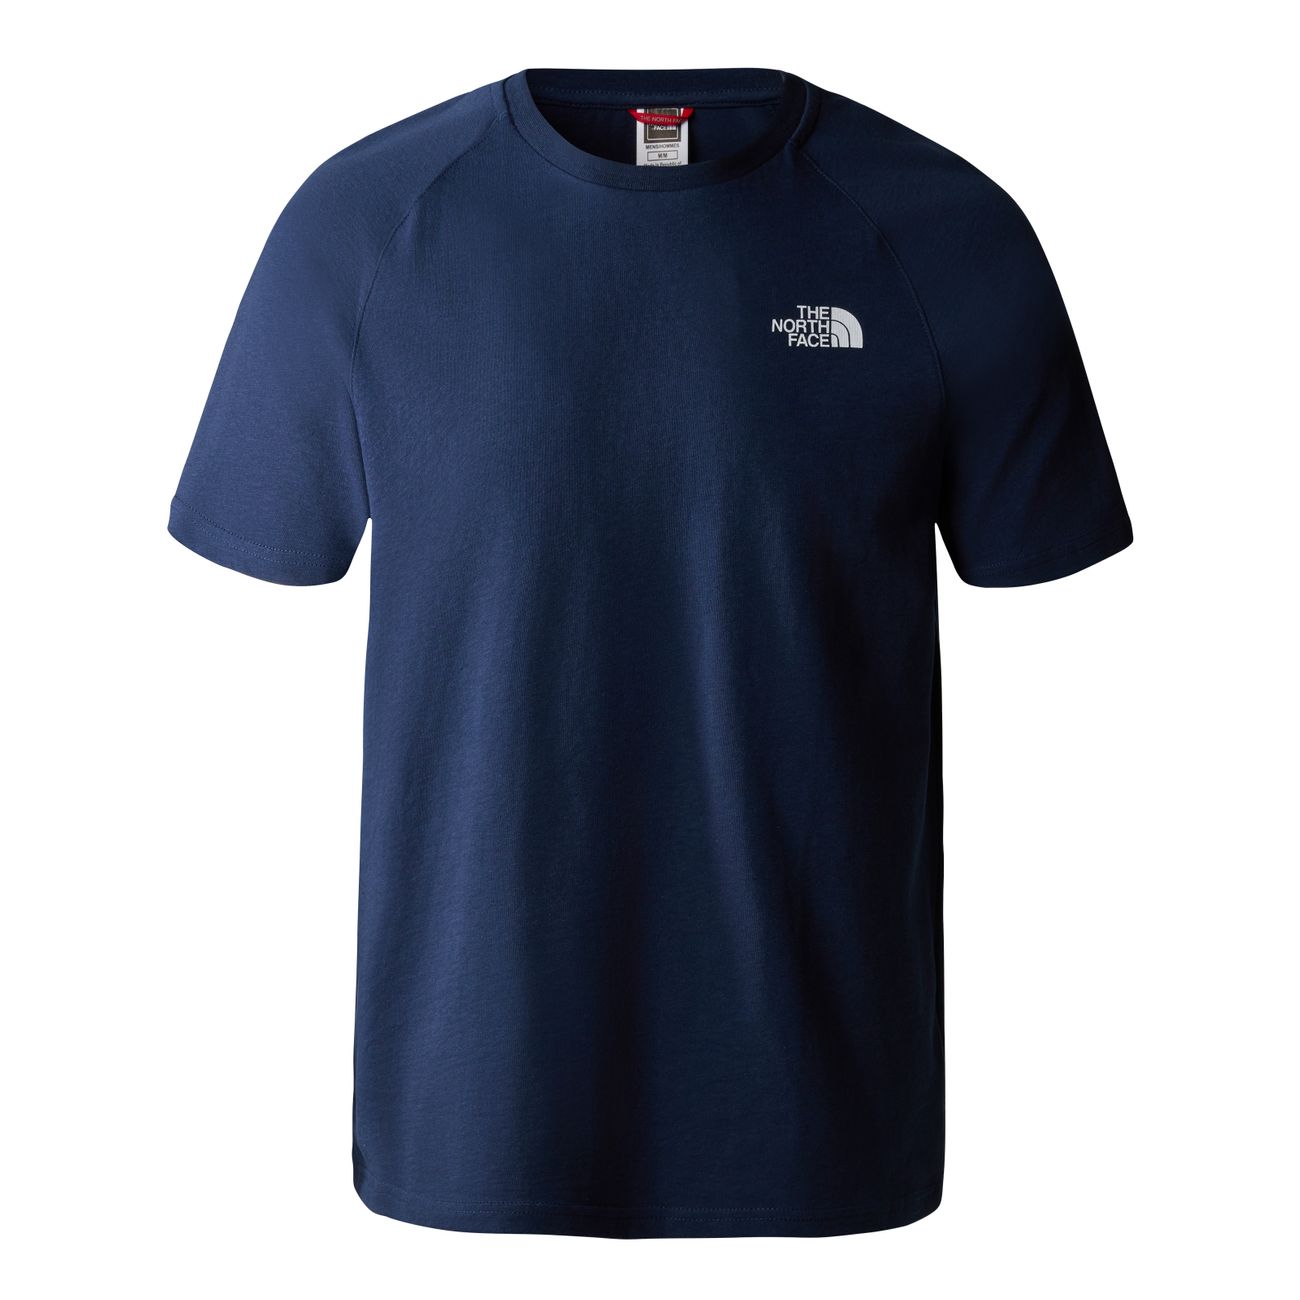 THE NORTH FACE M S/S NORTH FACES TEE Herren T-Shirt - The North Face - SAGATOO - 196009722682